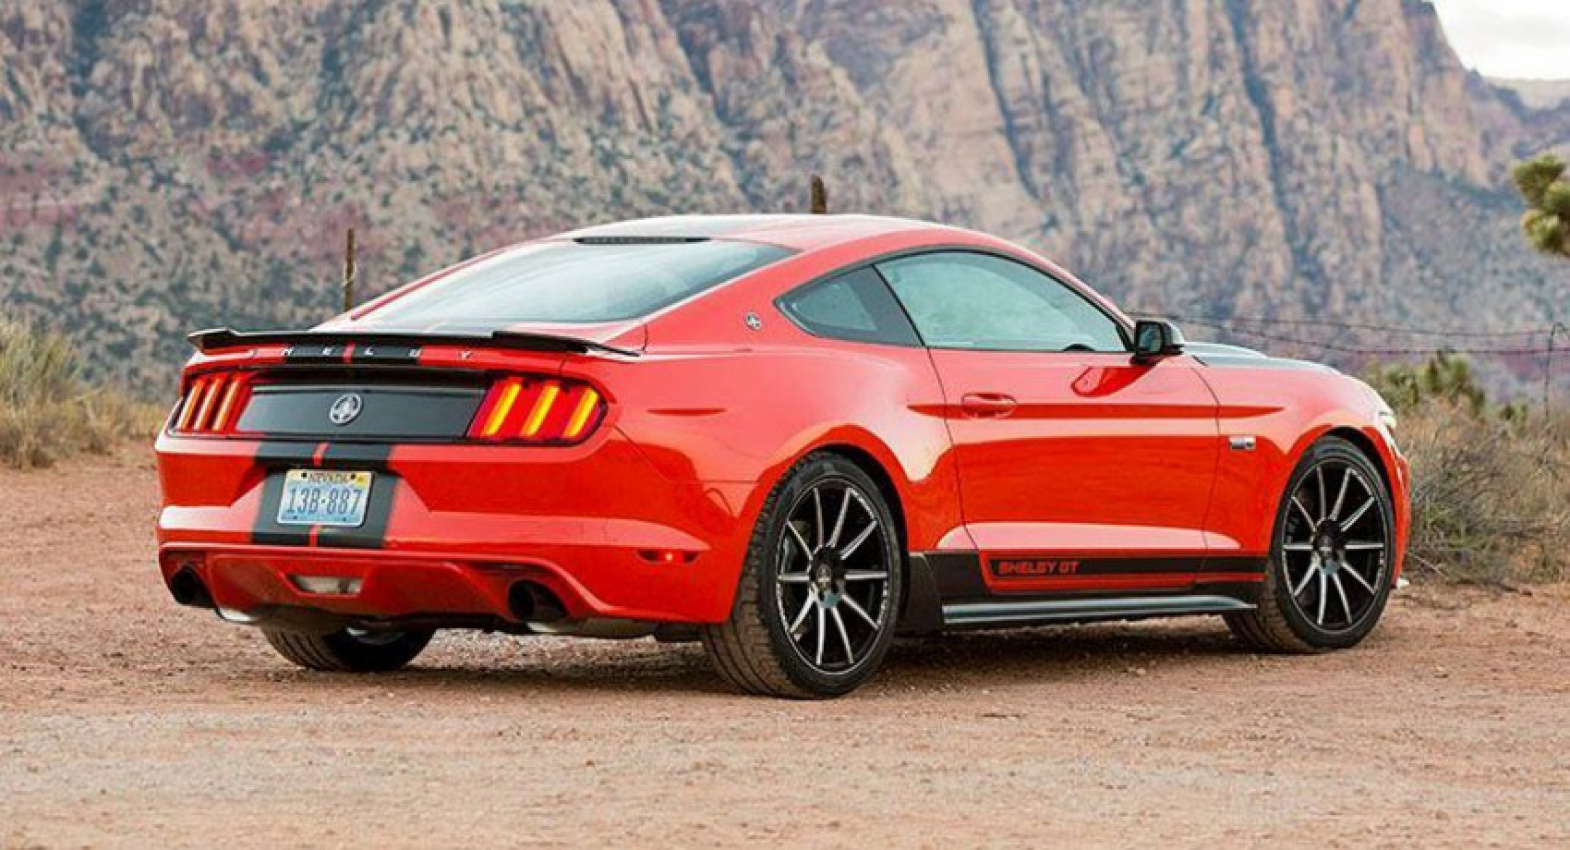 autos, cars, shelby, auto news, ford, ford mustang, ford mustang ecoboost, shelby american, shelby gt ecoboost mustang, shelby gt ecoboost mustang revealed packing more power, sharper handling